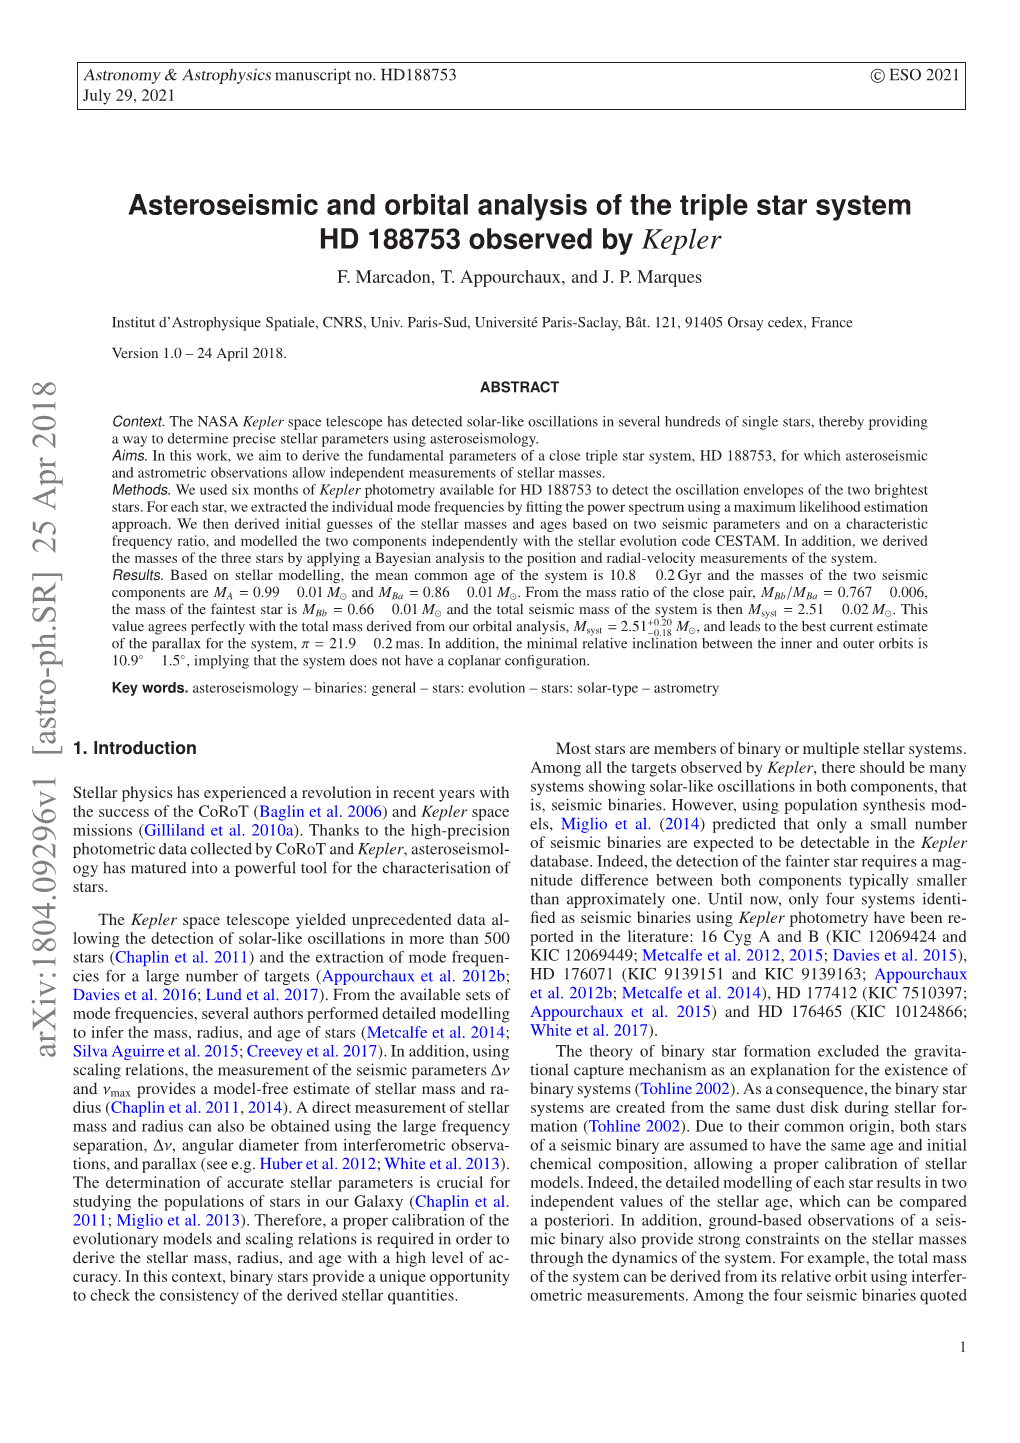 Asteroseismic and Orbital Analysis of the Triple Star System HD 188753 Observed by Kepler Above, Only the Pair HD 177412 Has a Suﬃciently Short Period, Table 1